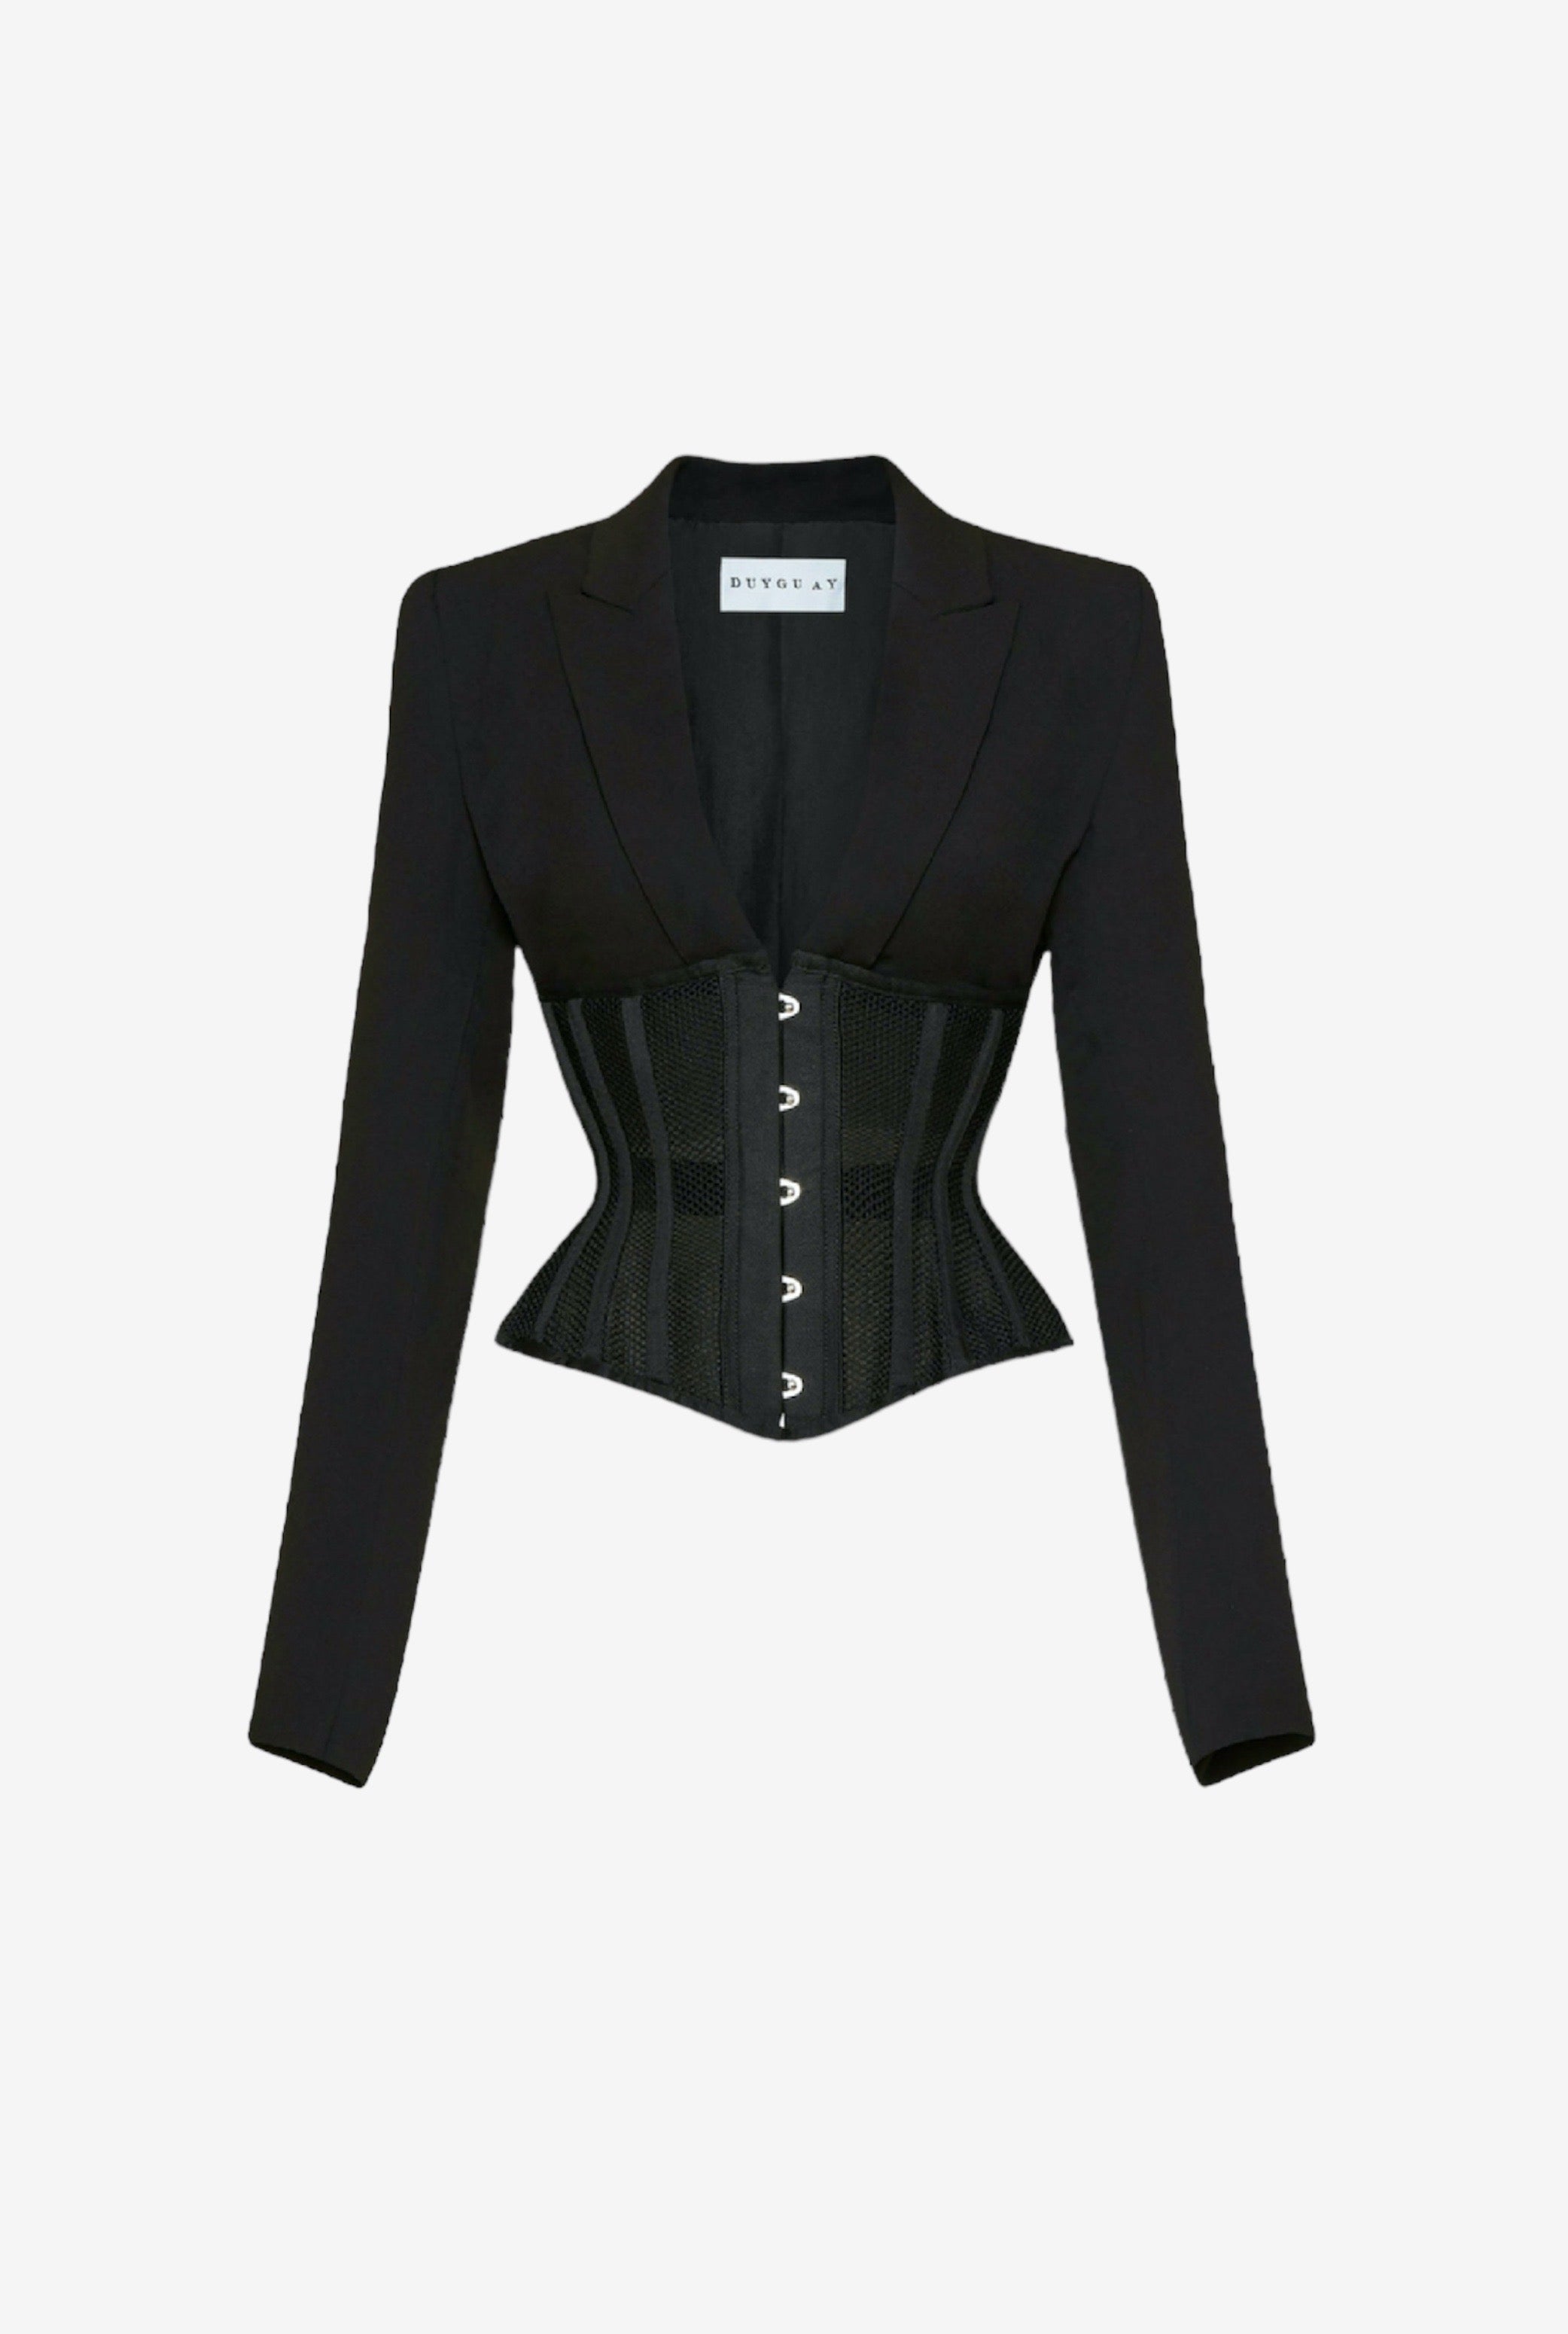 Outfits with a Corset: Featuring “Corset Jacket” – Lucy's Corsetry